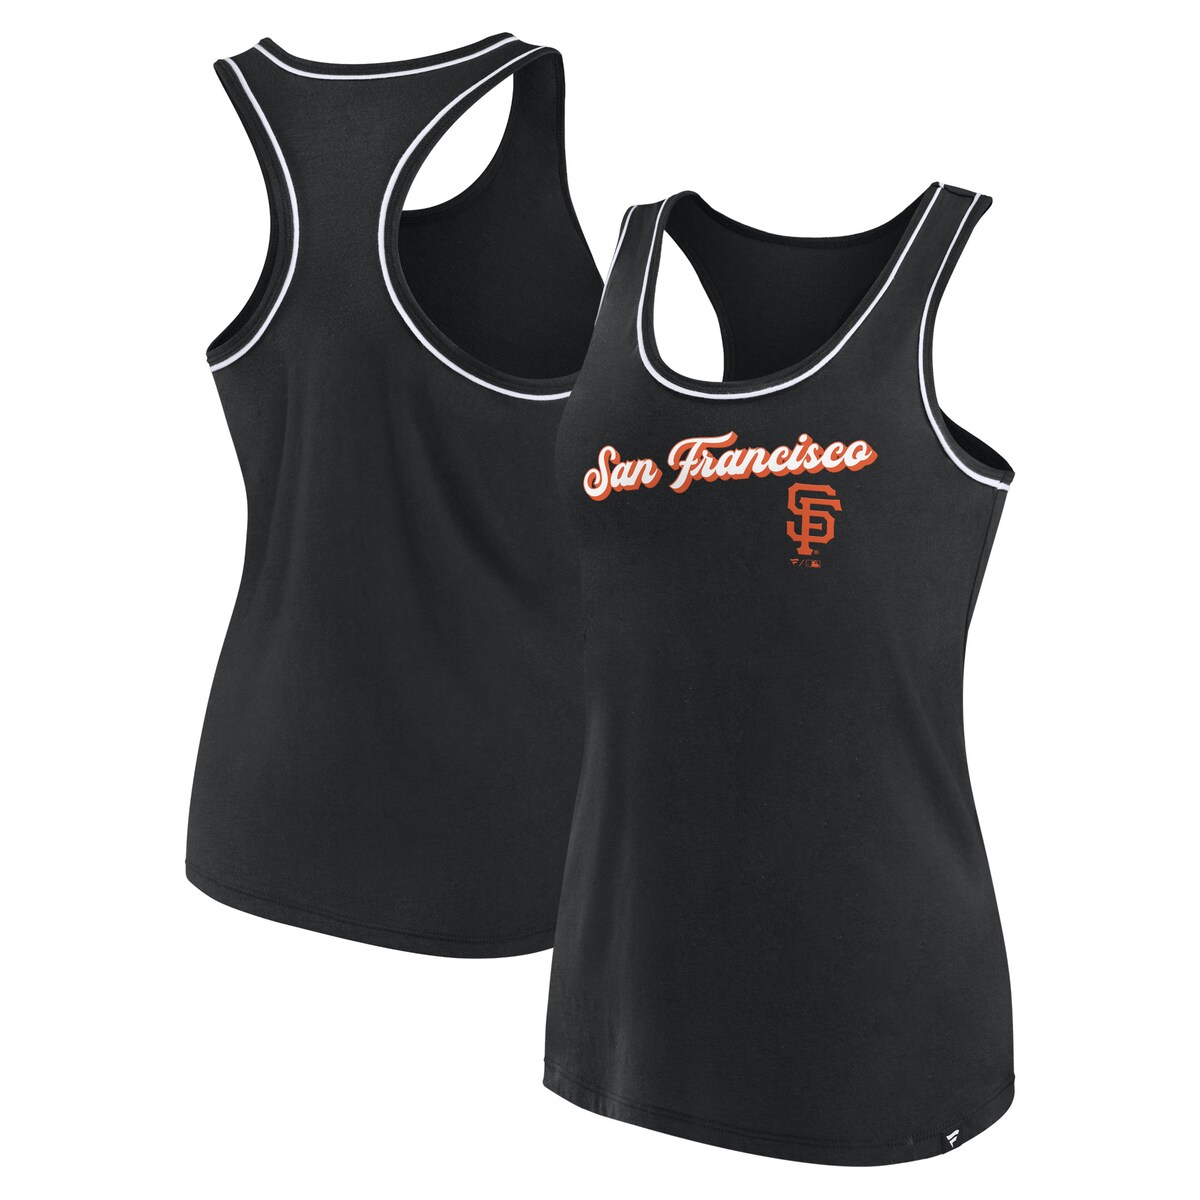 When the temperature warms up, beat the heat in bold San Francisco Giants style by grabbing this Wordmark Logo tank top from Fanatics Branded. Its sleek racerback design offers an athletic look, while the printed San Francisco Giants graphics make it clear who you root for when it's go time. Pair this top with your favorite cap or team-inspired accessory for an unquestionably spirited ensemble.Officially licensedMachine wash, tumble dry lowMaterial: 100% CottonRacerbackImportedBrand: Fanatics BrandedScreen print graphicsScoop neck